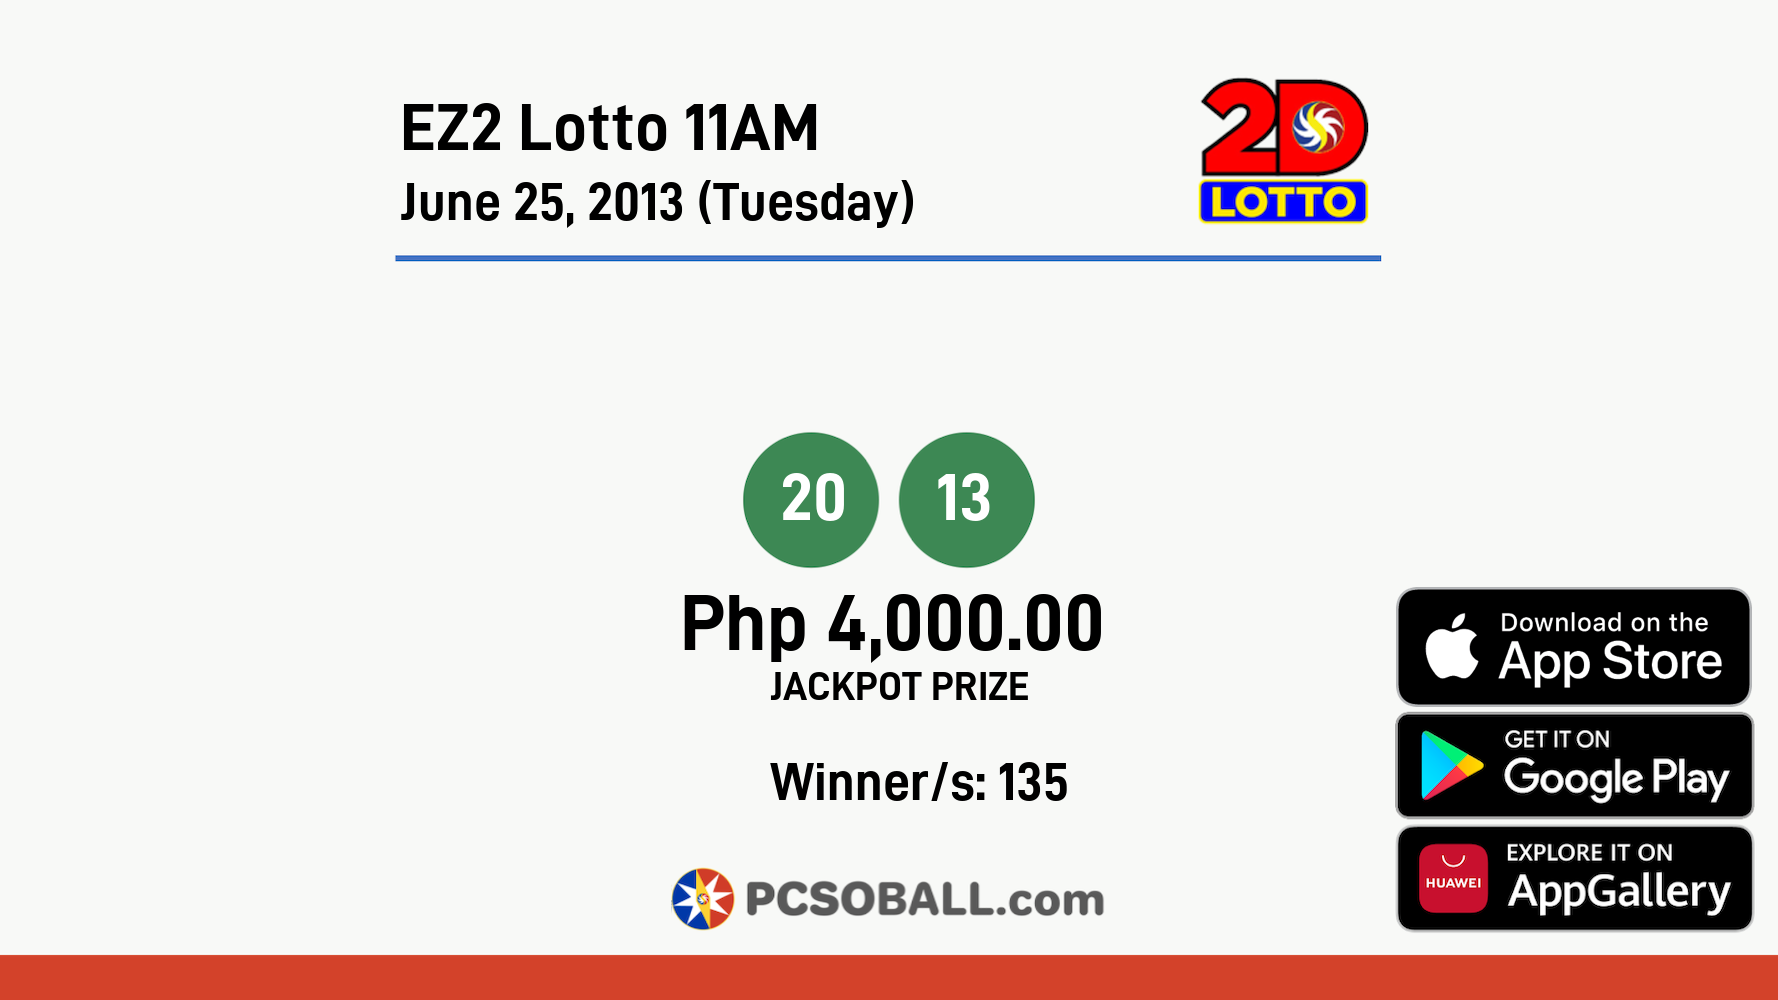 EZ2 Lotto 11AM June 25, 2013 (Tuesday) Result